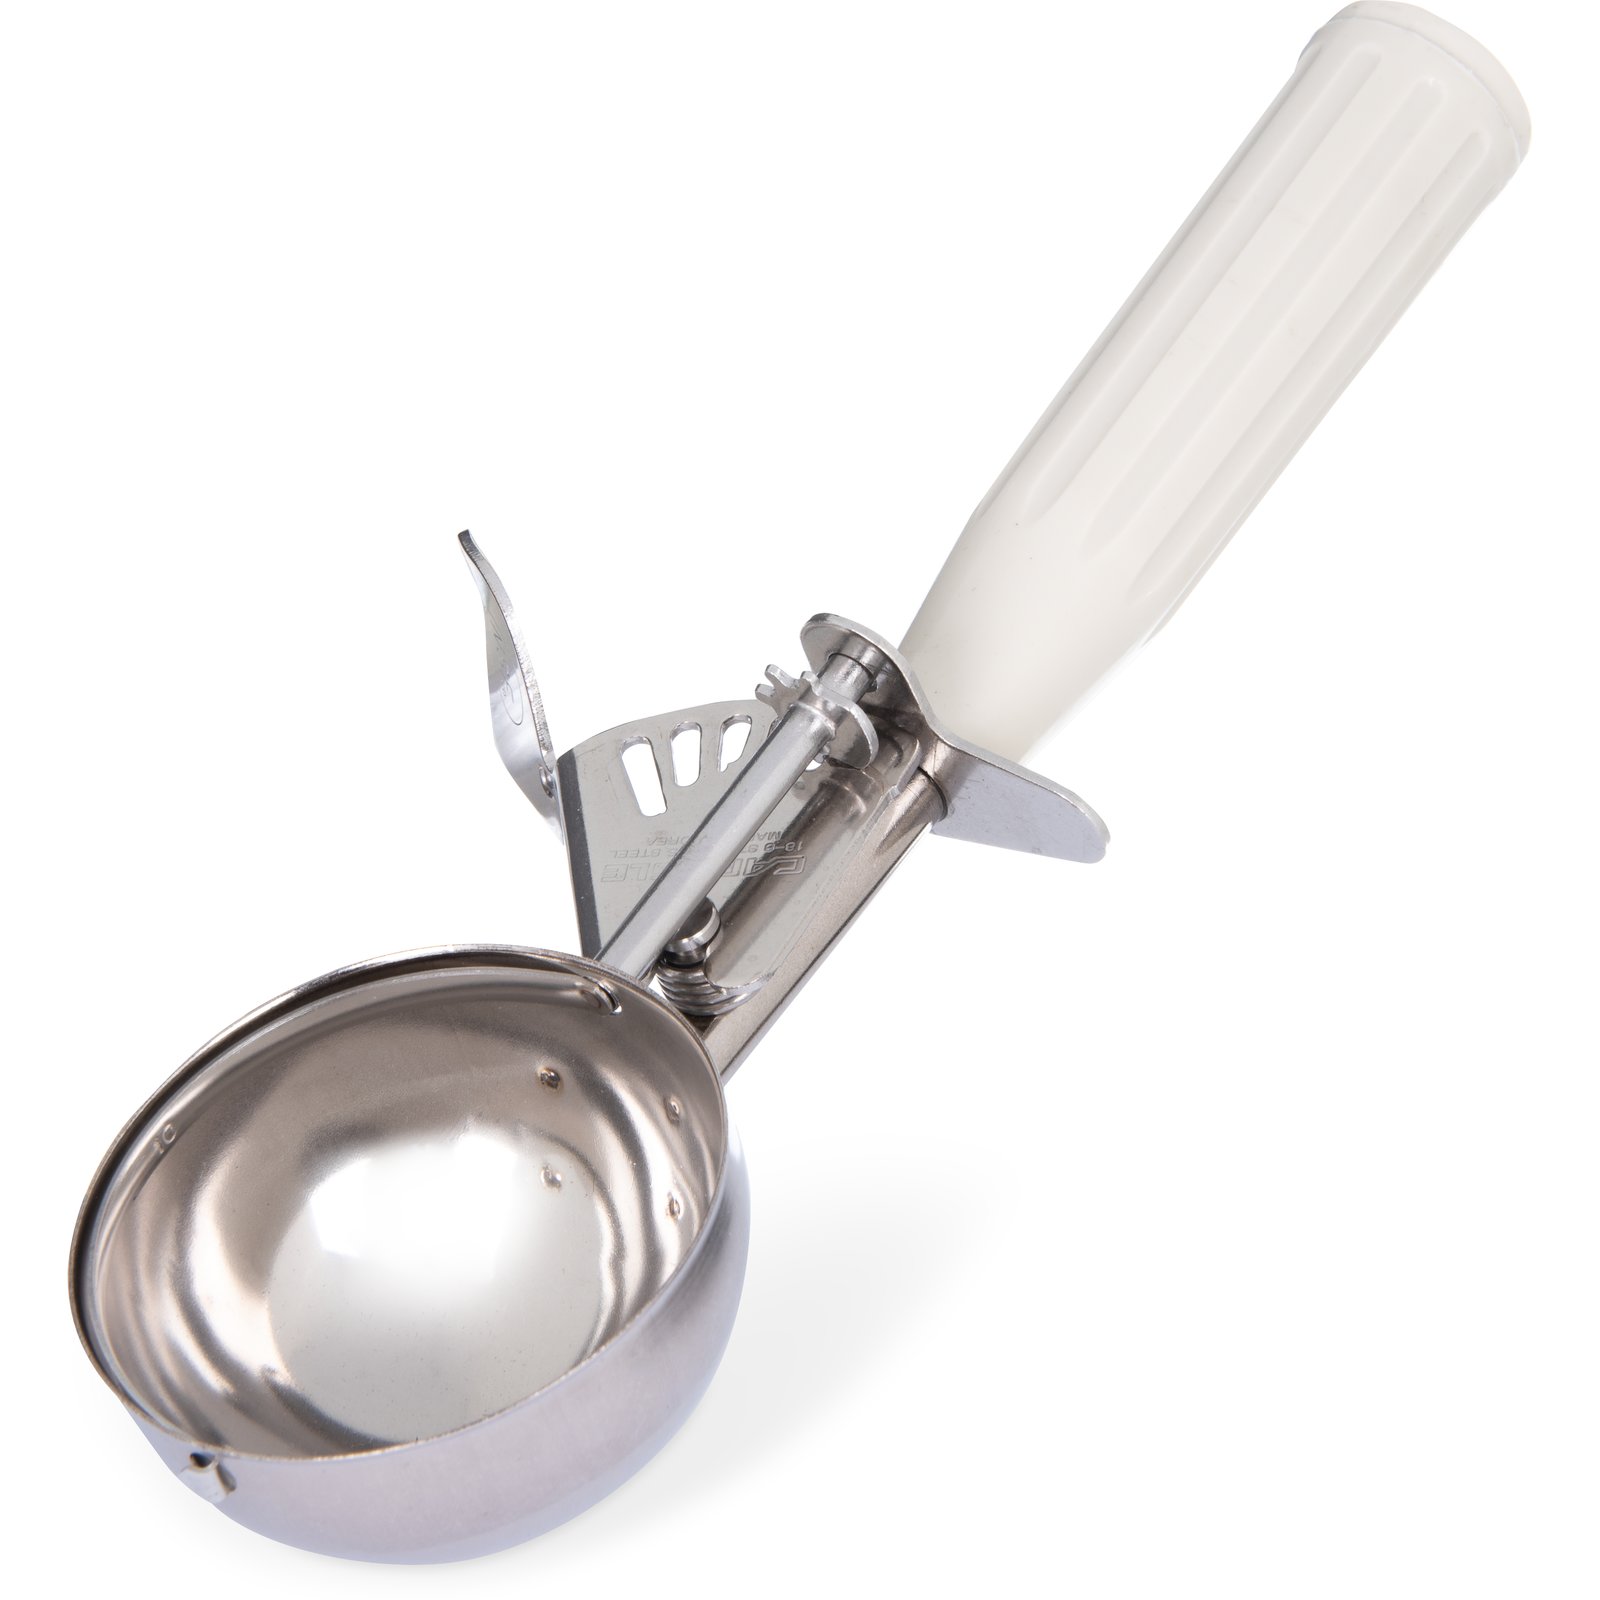 Comfy Grip 3.75 oz Stainless Steel #10 Portion Scoop - with Ivory